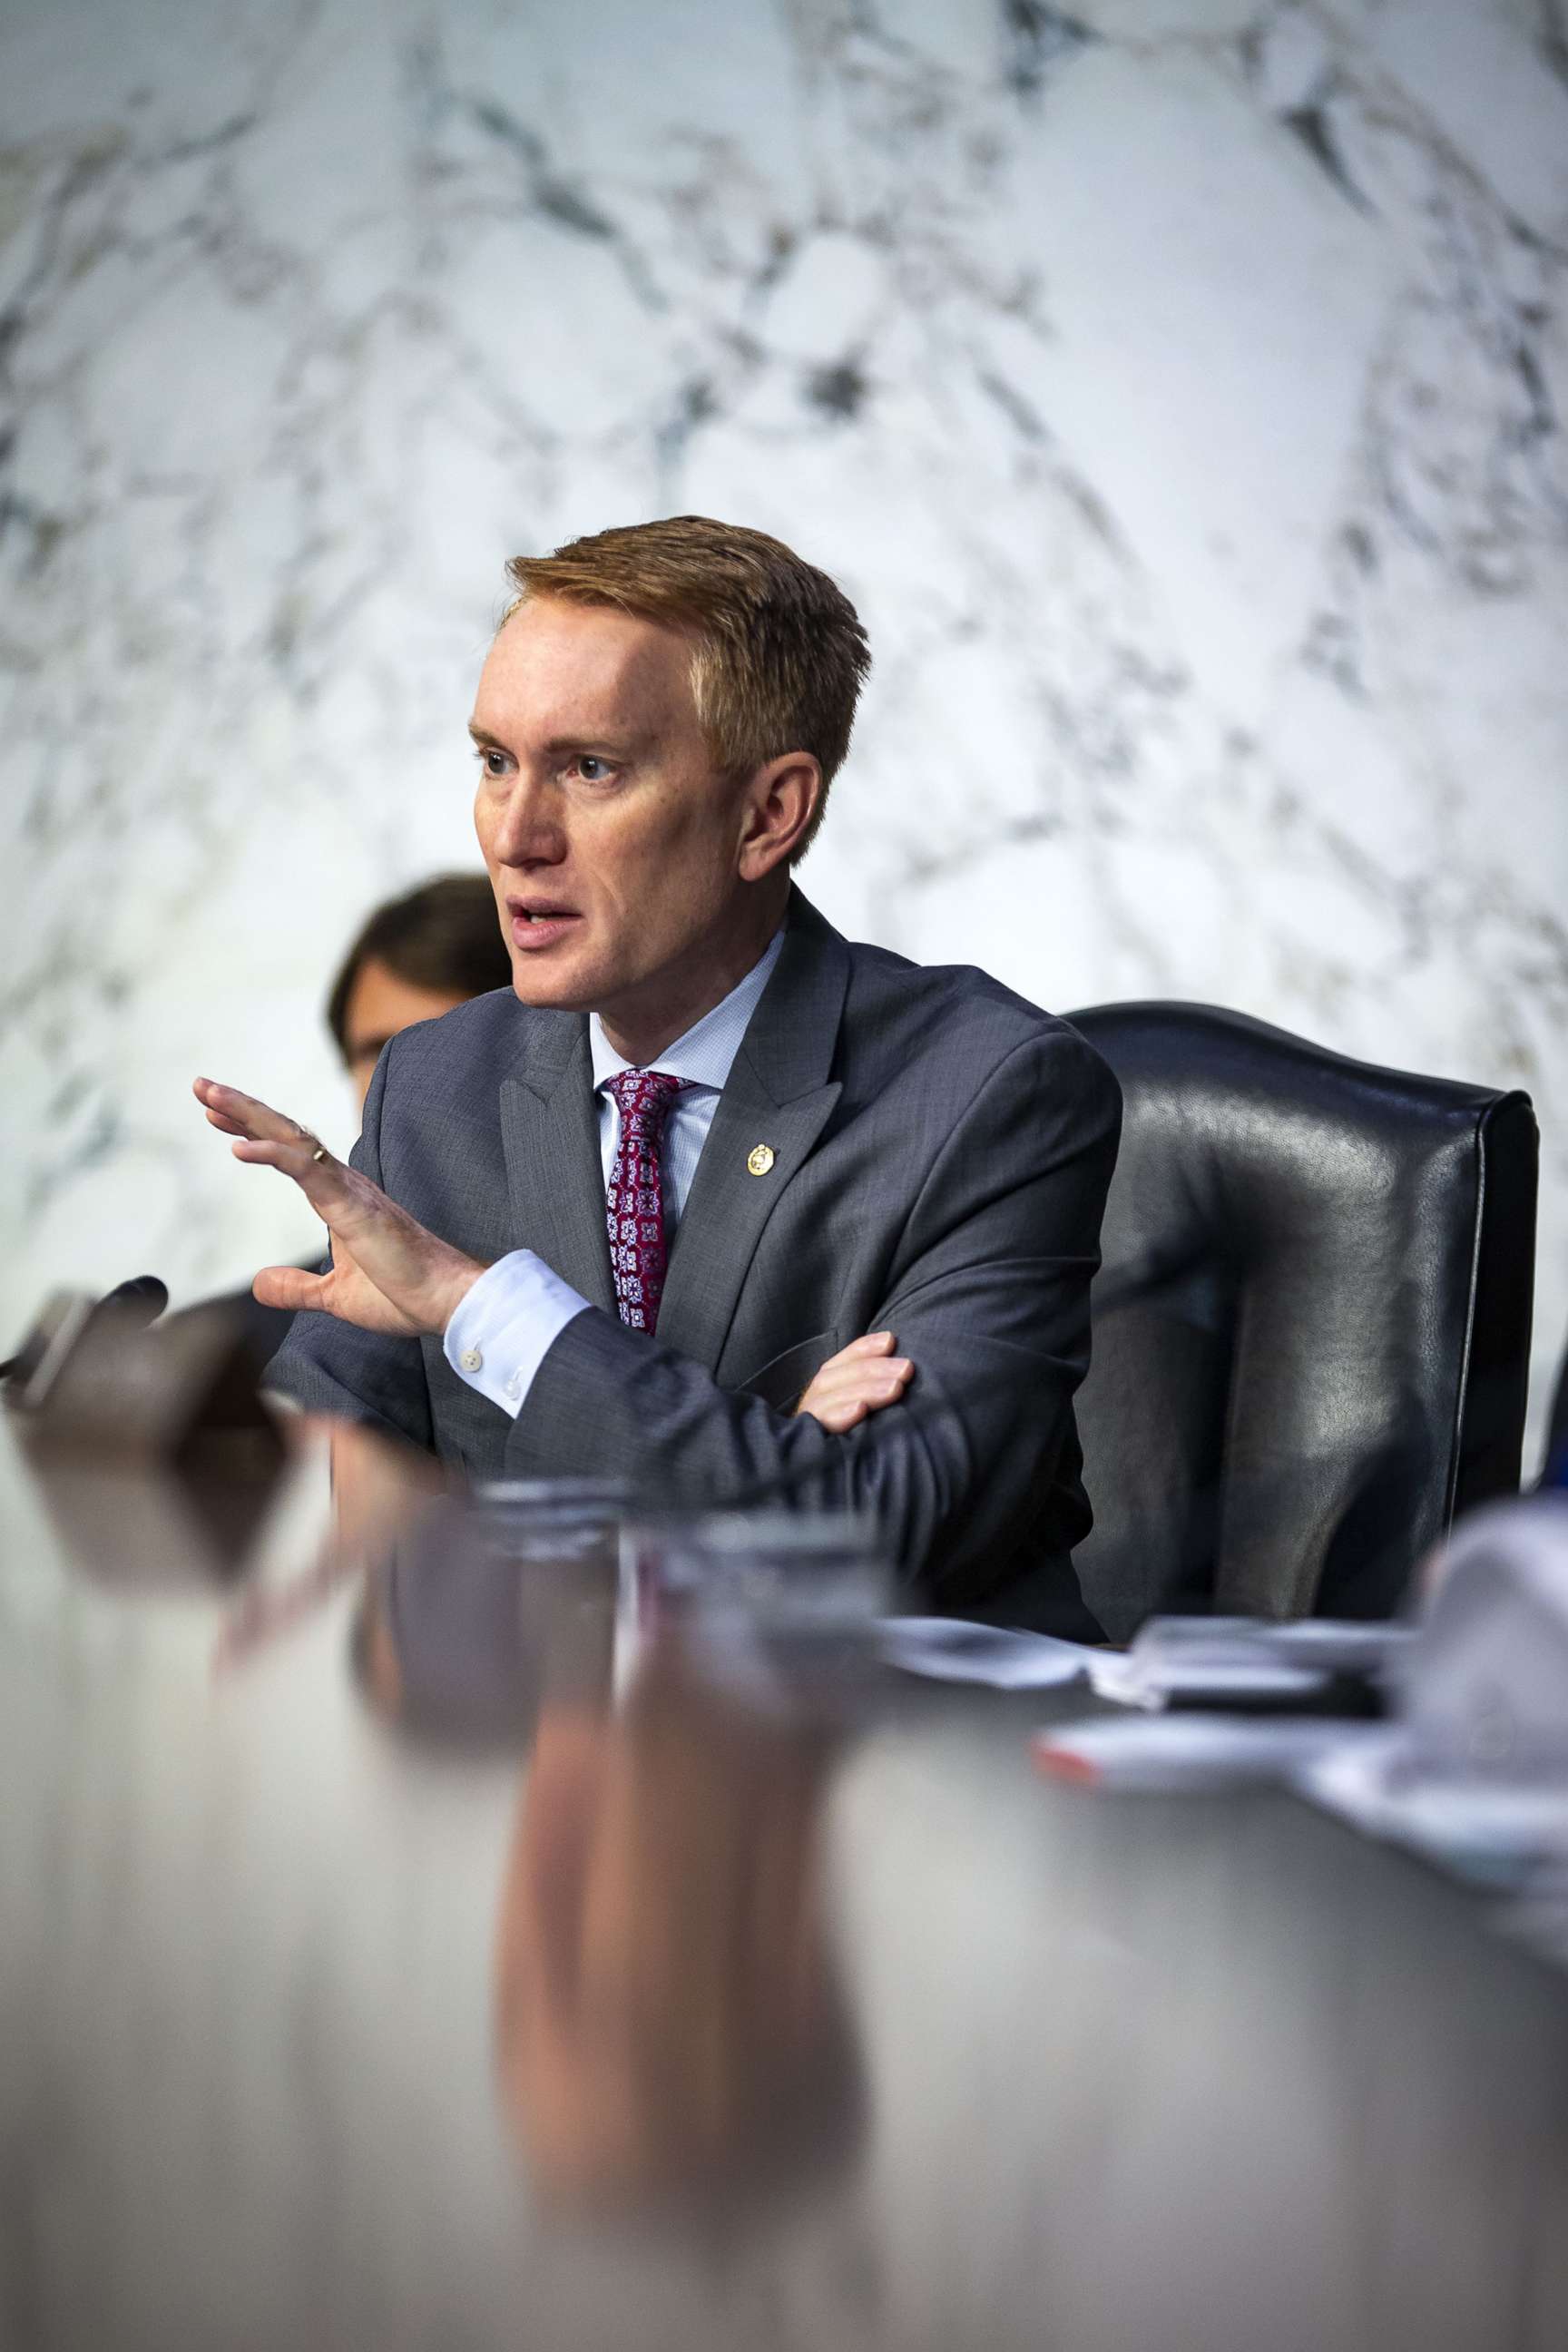 PHOTO: Sen. James Lankford questions retired Vice Adm. Joseph Maguire during a Senate Intelligence Committee confirmation hearing, to become the director of the National Counterterrorism Center, on Capitol Hill, on July 25, 2018 in Washington, D.C.